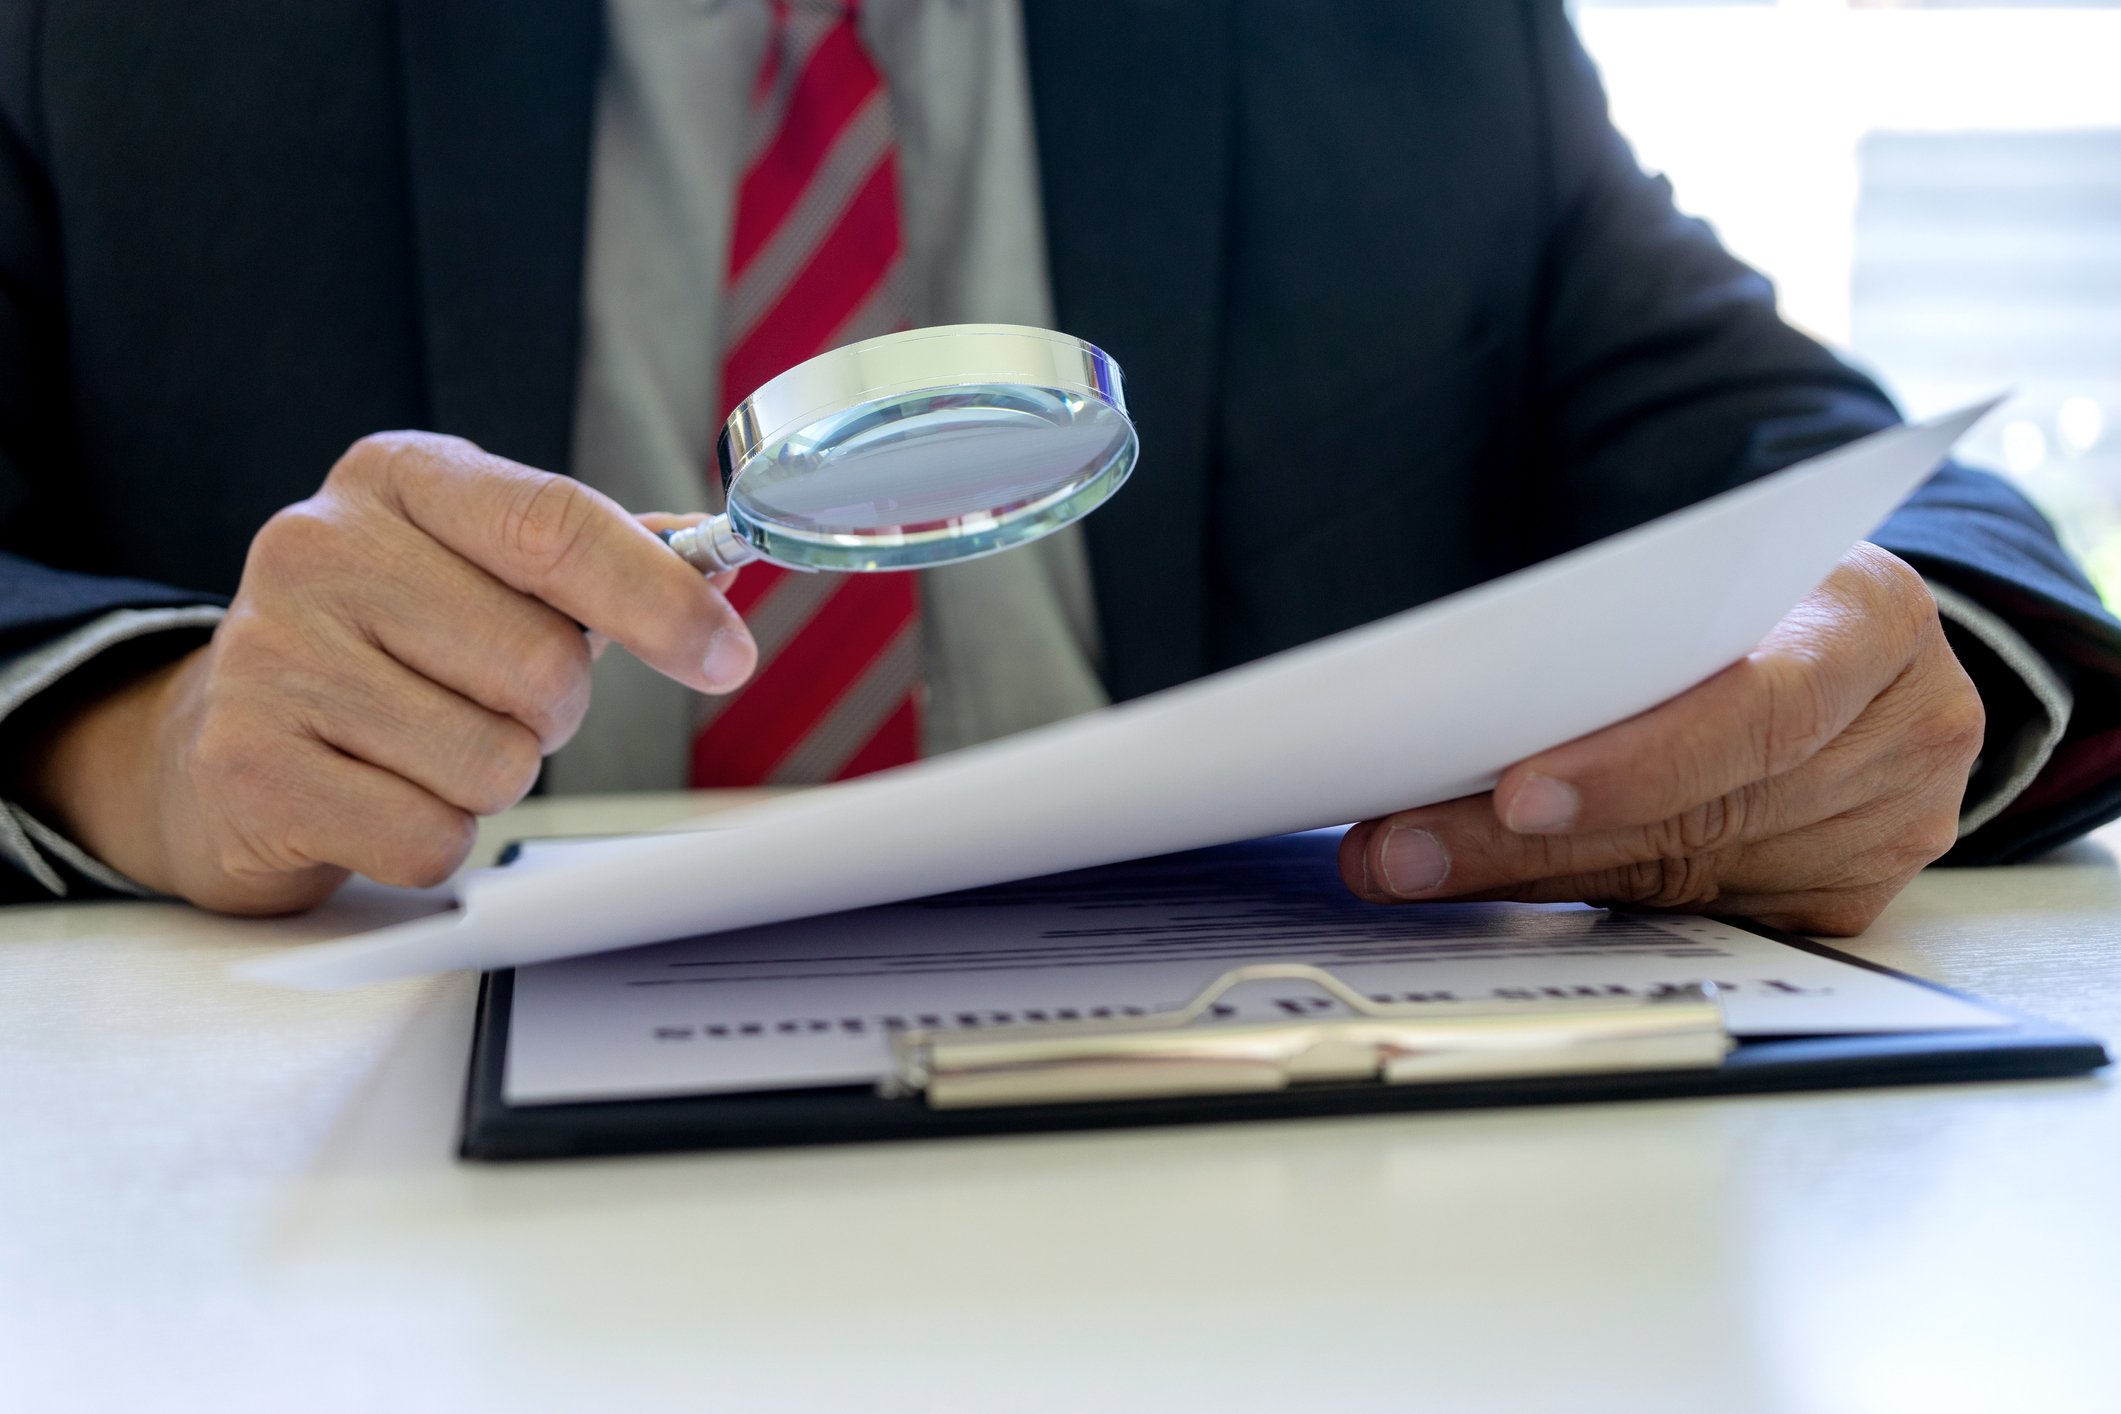 Person uses magnifying glass to inspect a document